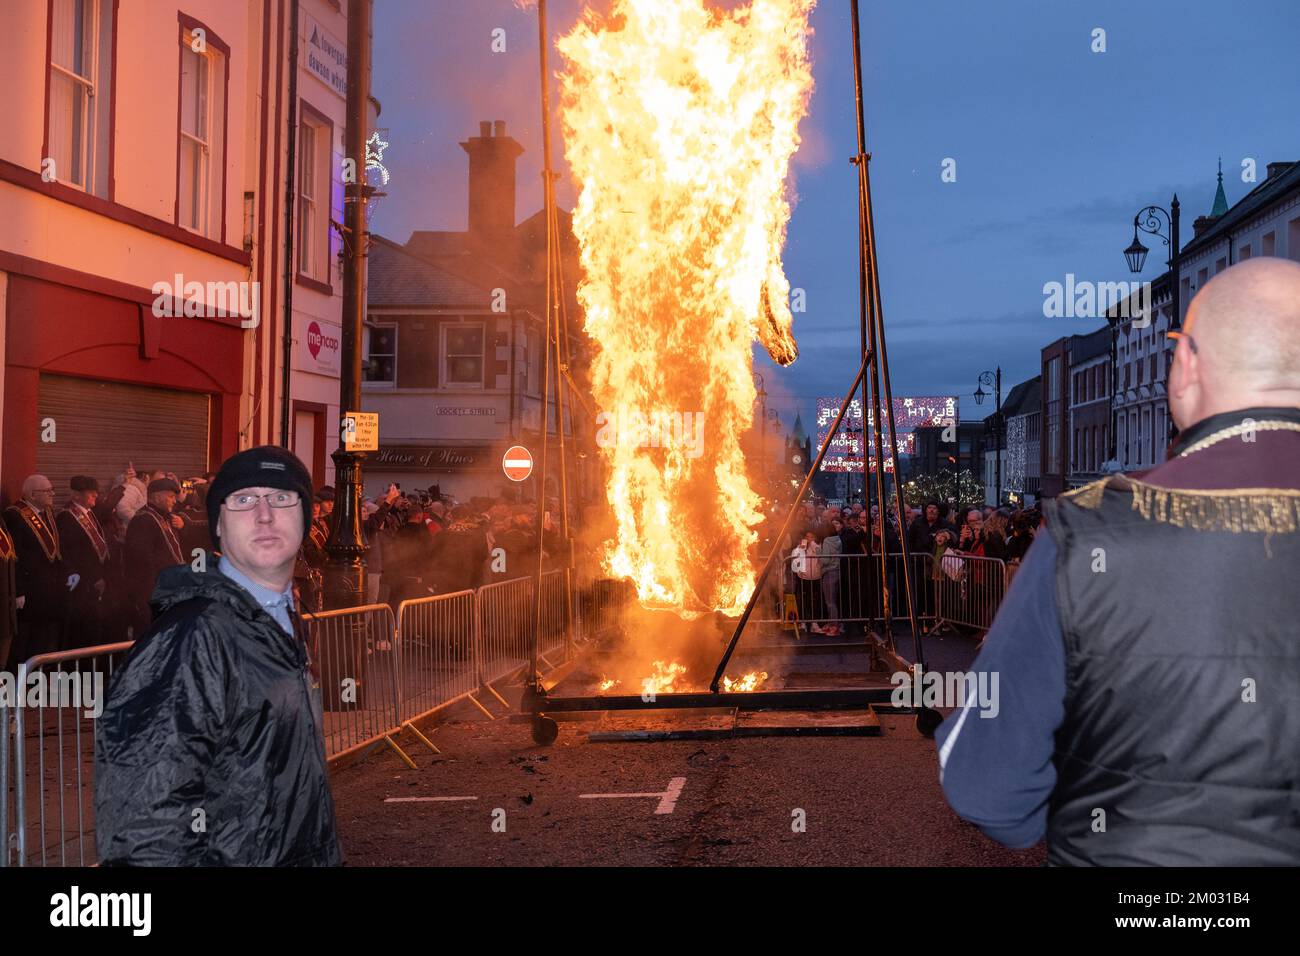 Londonderry, United Kingdom. 3 Dec, 2022. Crowds watching the burning of the effigy of Lundy the Traitor at Shutting of the Gates 2022. Credit: Steve Nimmons/Alamy Live News Stock Photo